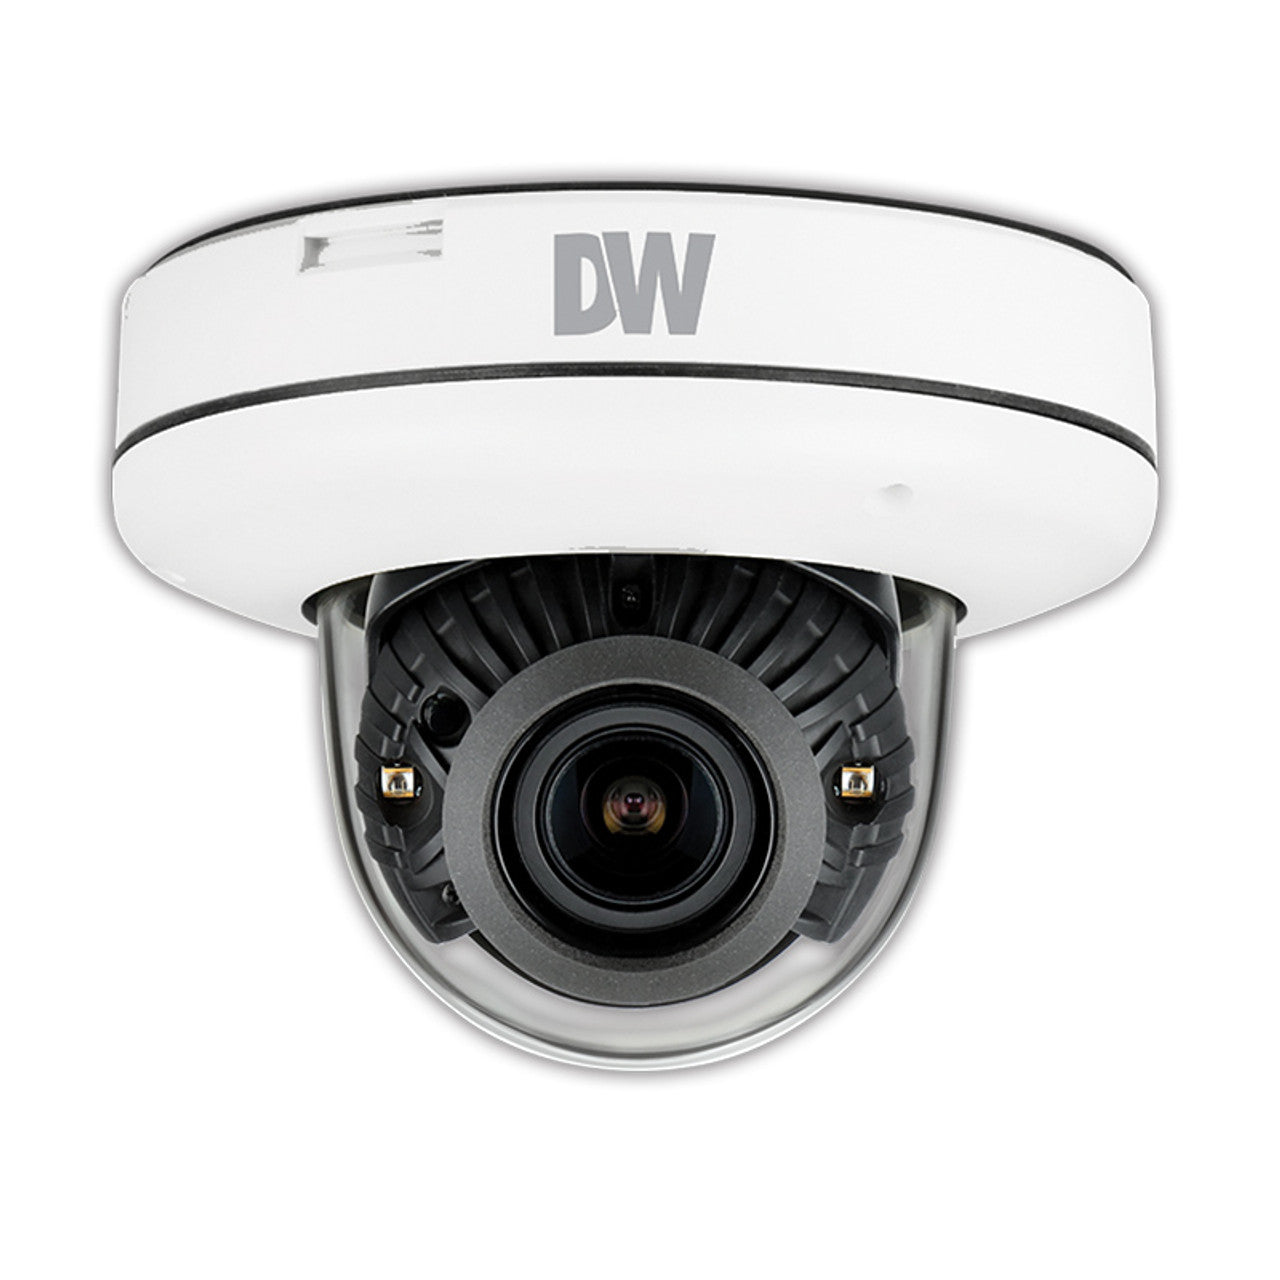 Digital Watchdog DWC-MV82WIATW 2.1MP IR H.265 Outdoor Dome IP Security Camera with Motorized Lens and Starlight